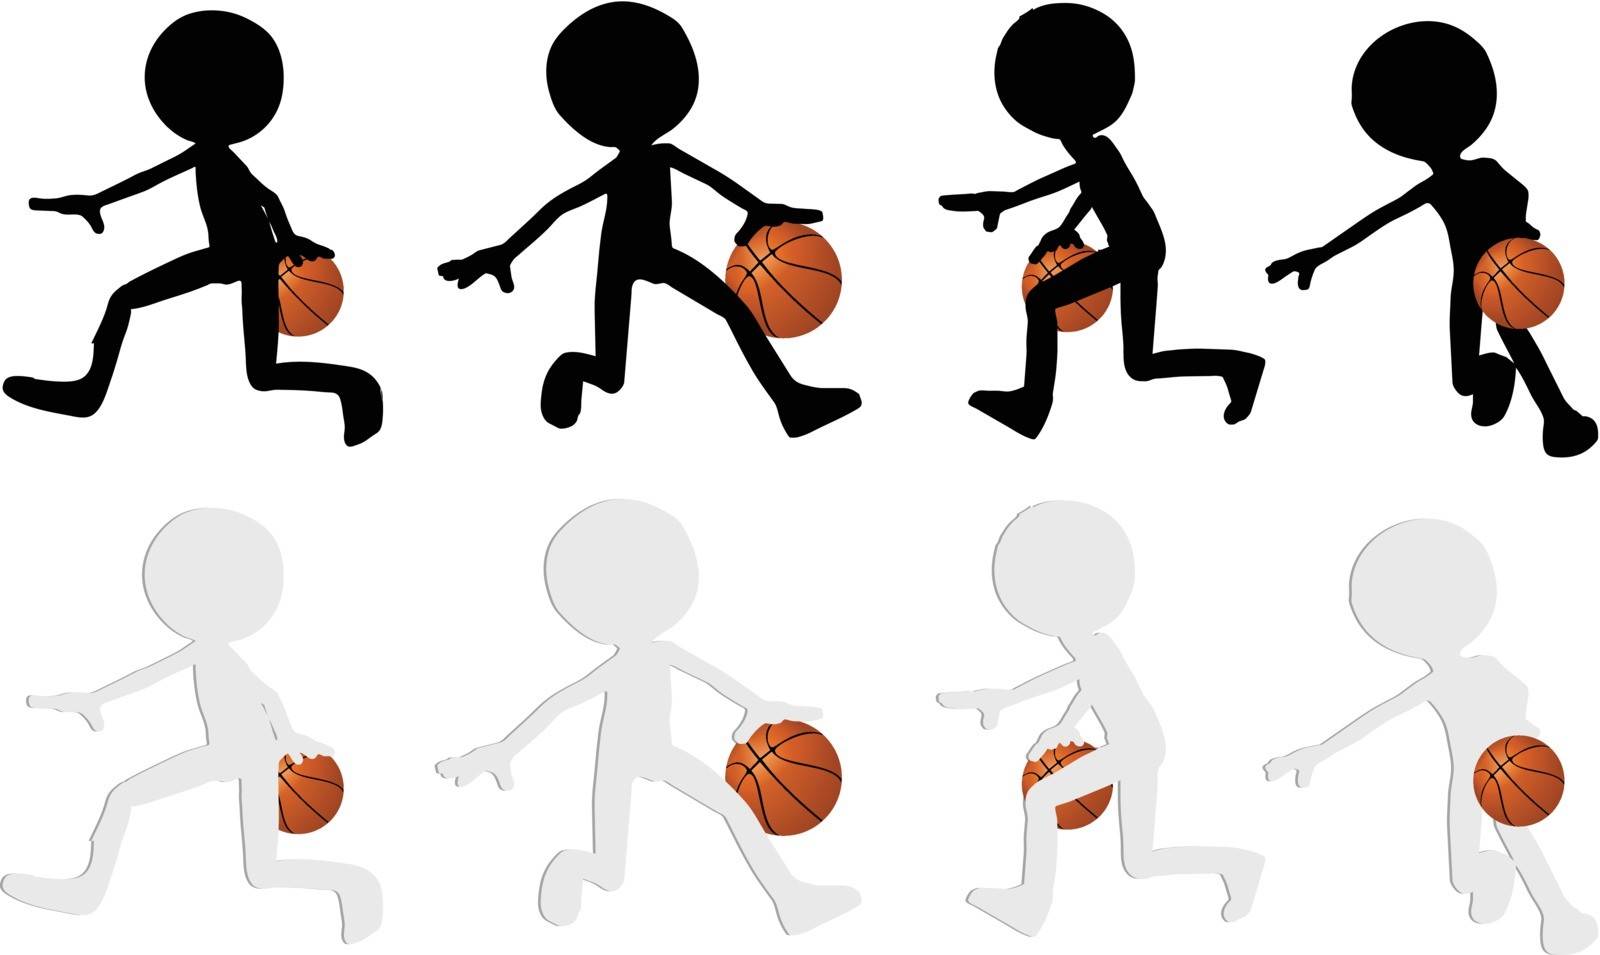 basketball players silhouette collection in dribble position by Istanbul2009